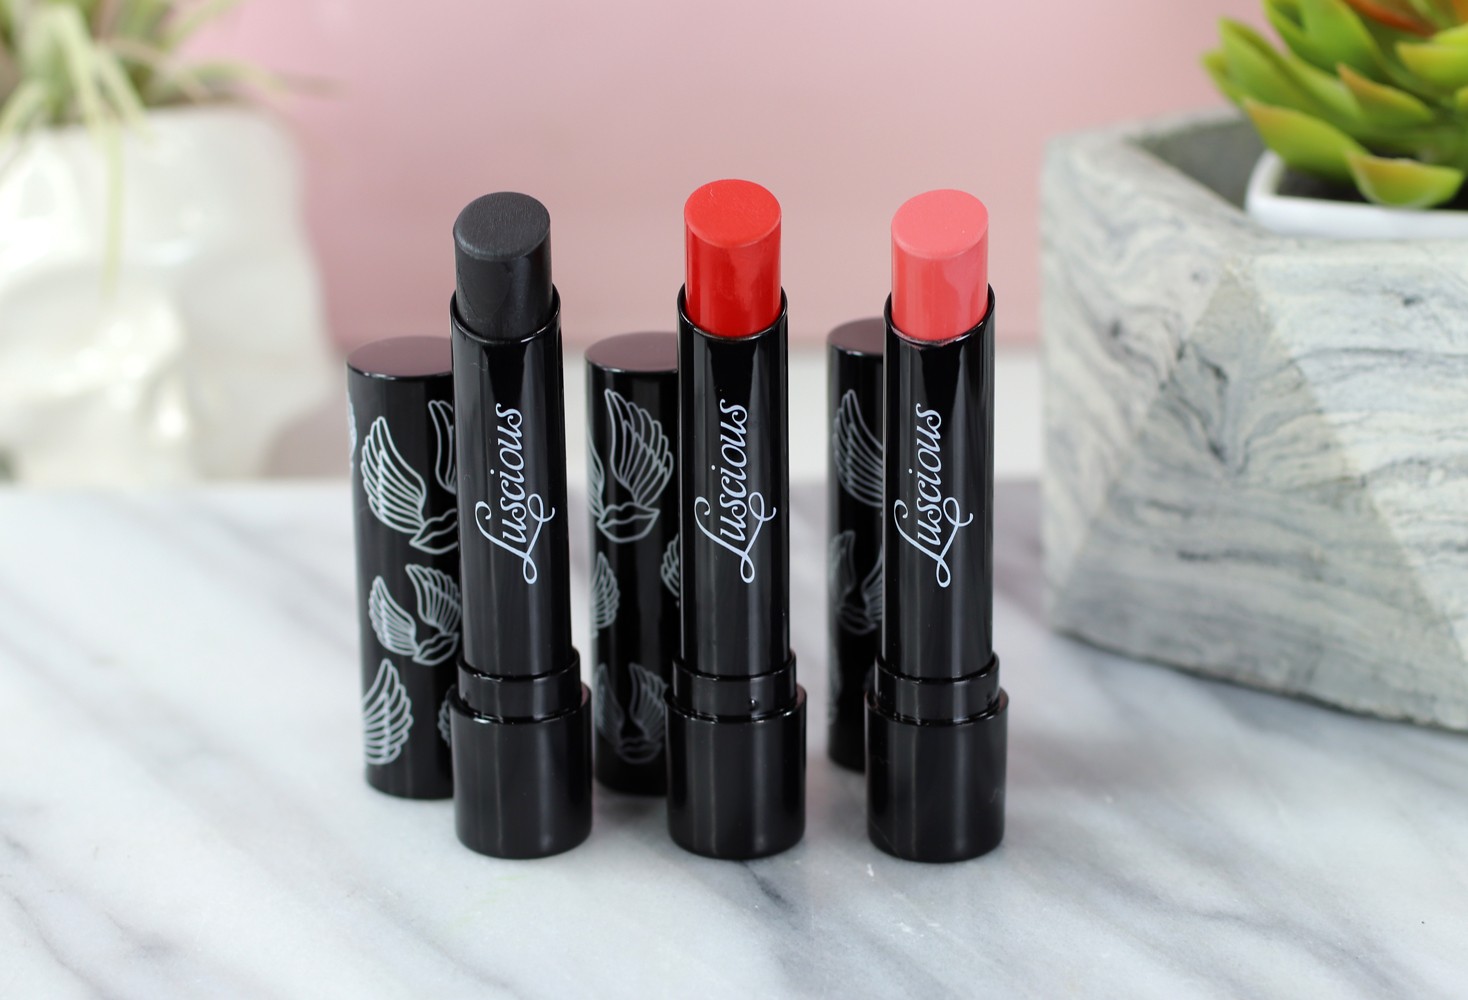 Luscious Cosmetics Creamy Matte Lipstick - Luscious Cosmetics Review and Try On by popular LA cruelty free beauty blogger My Beauty Bunny